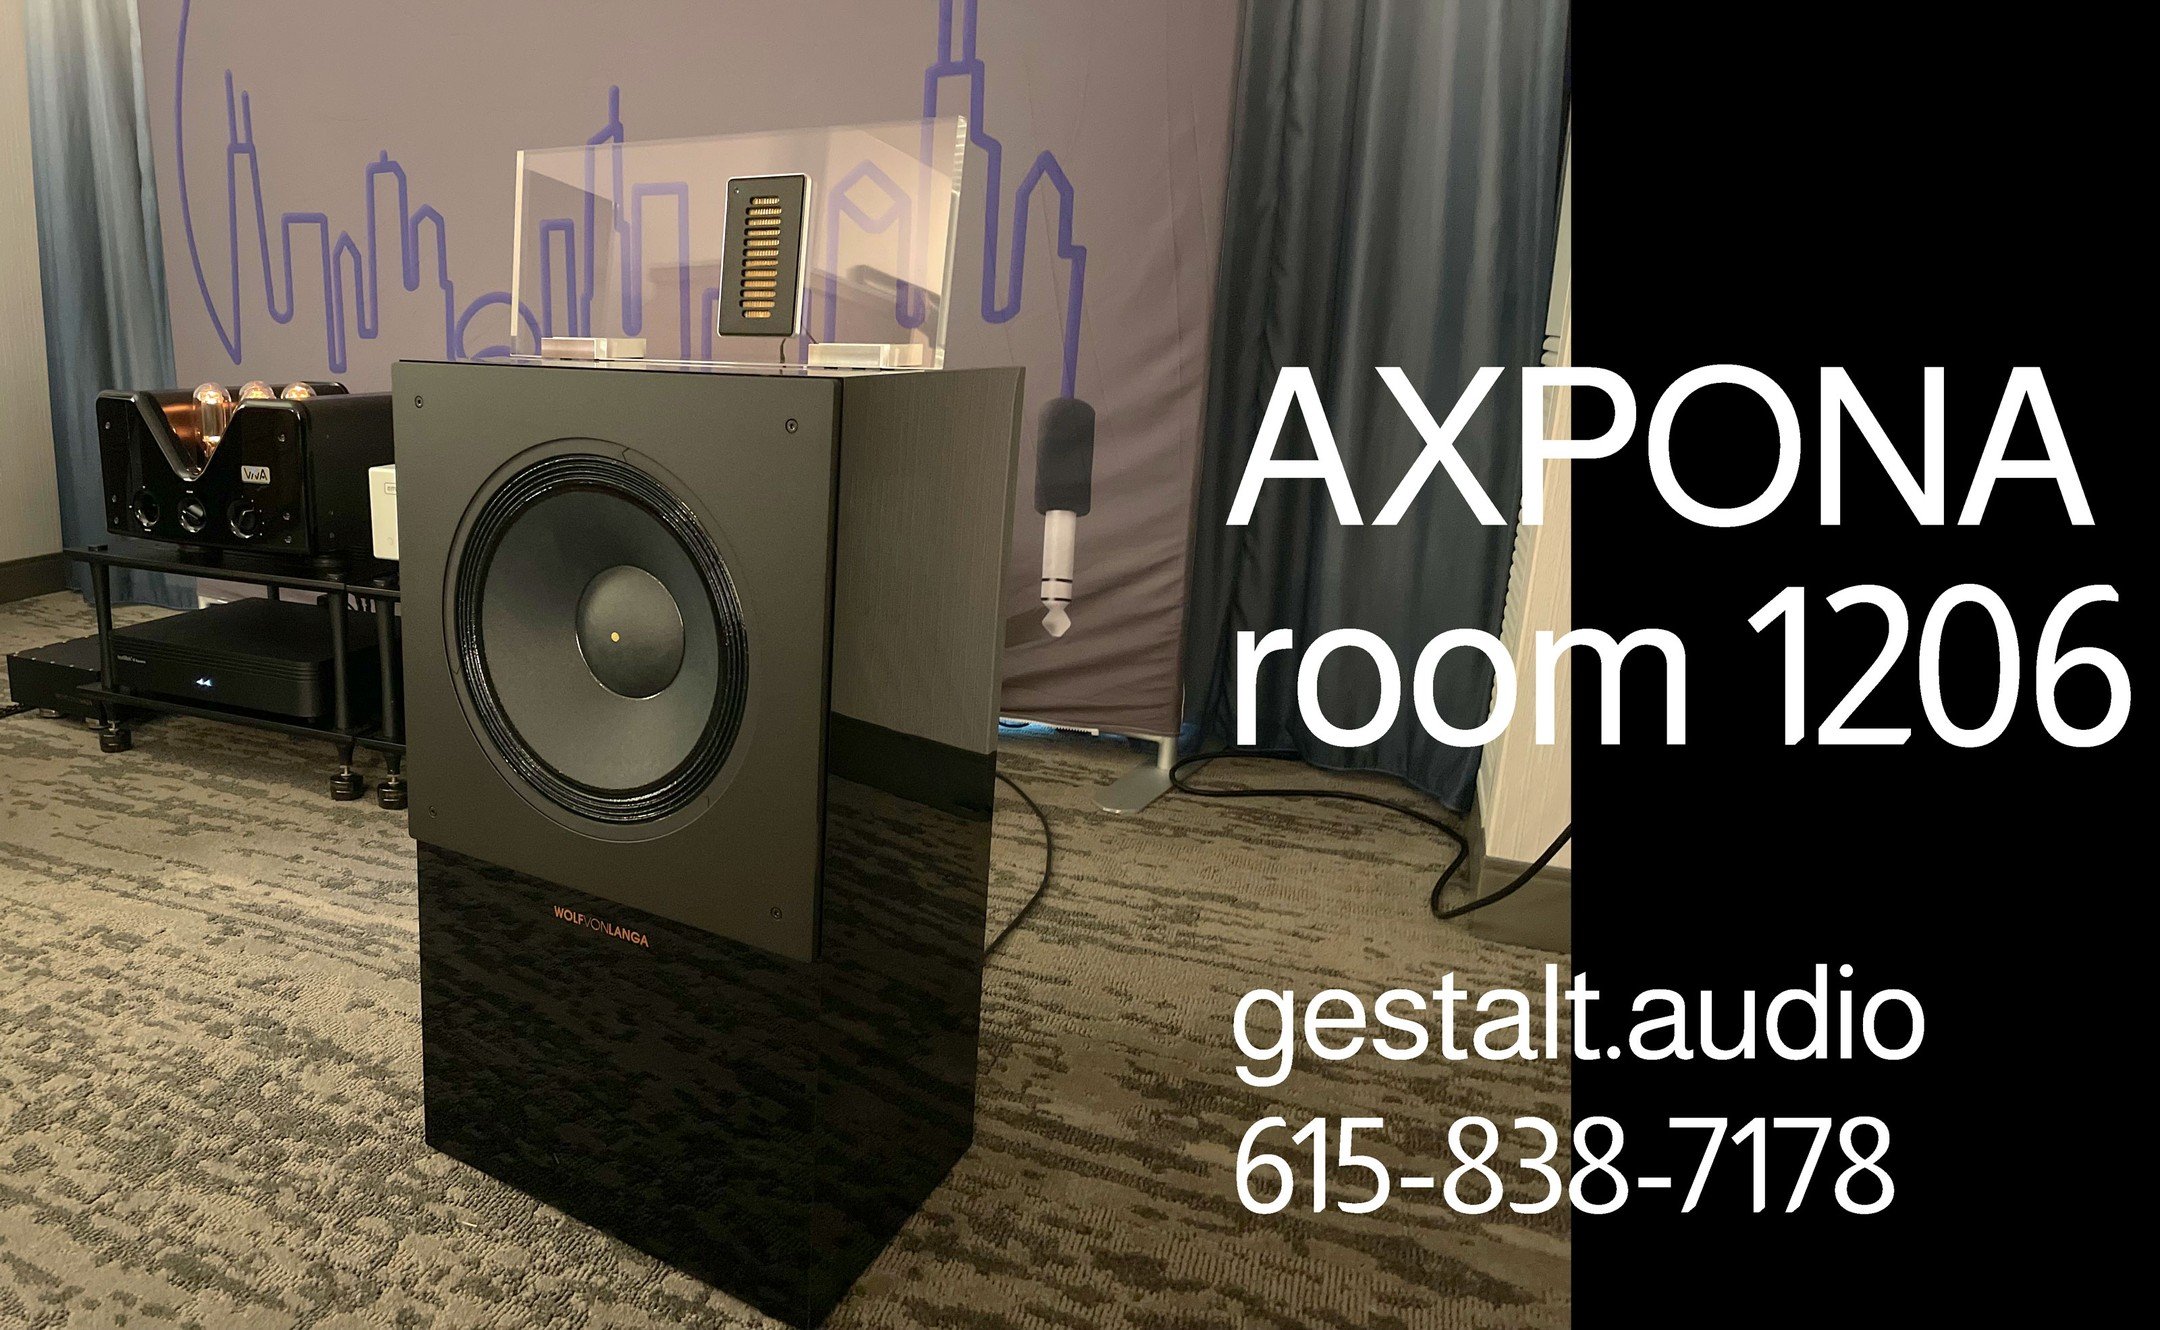 .
WVL 12739 ULTIMA @ AXPONA 2024
Room 1206

Available in the USA and CANADA 
gestalt.audio